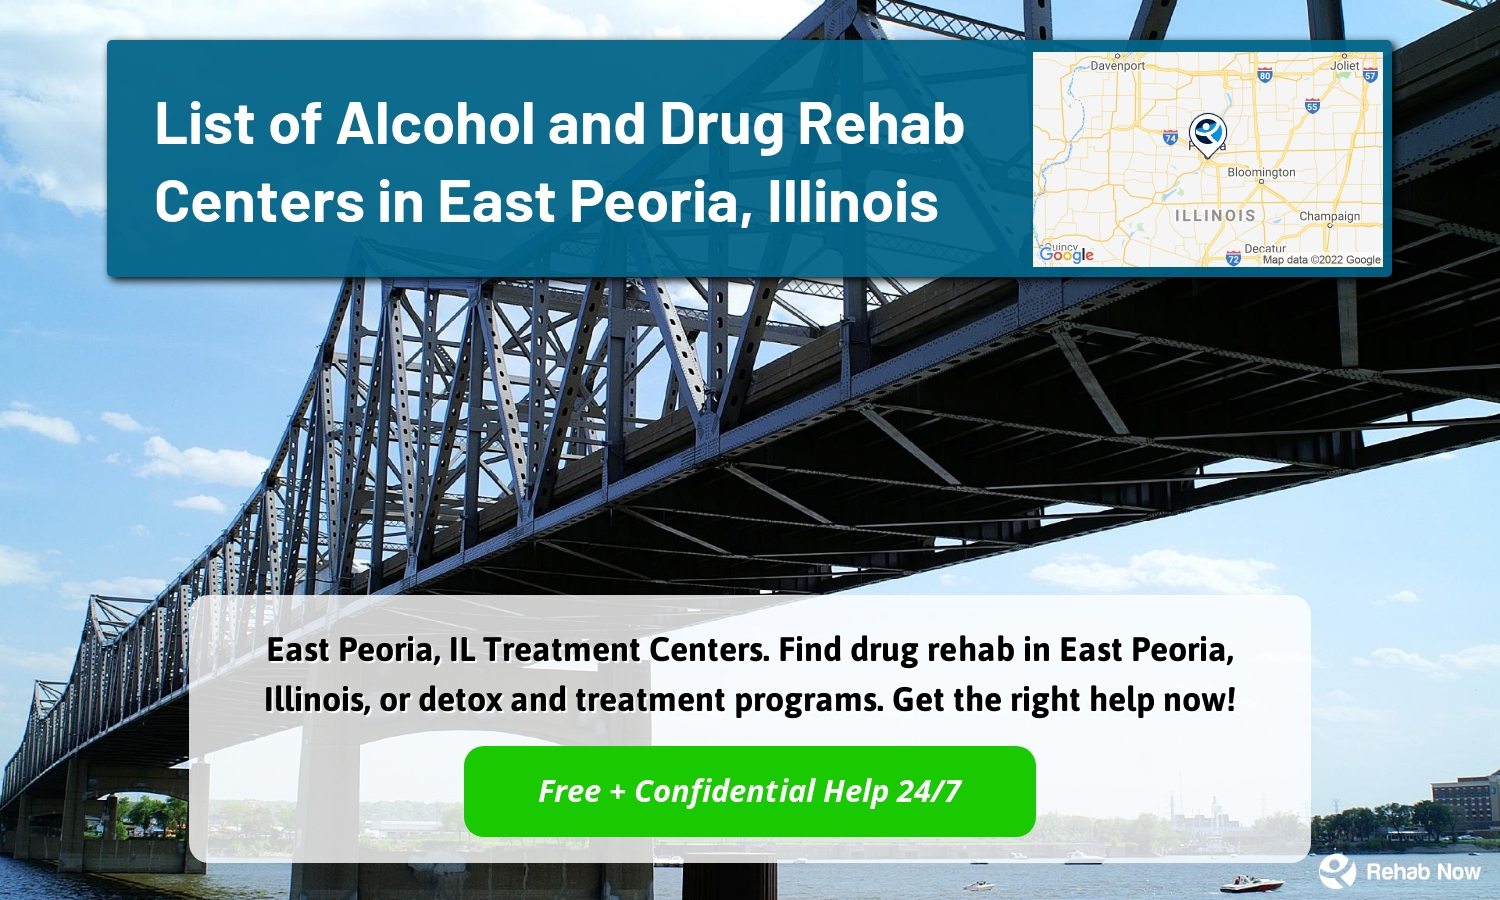 East Peoria, IL Treatment Centers. Find drug rehab in East Peoria, Illinois, or detox and treatment programs. Get the right help now!